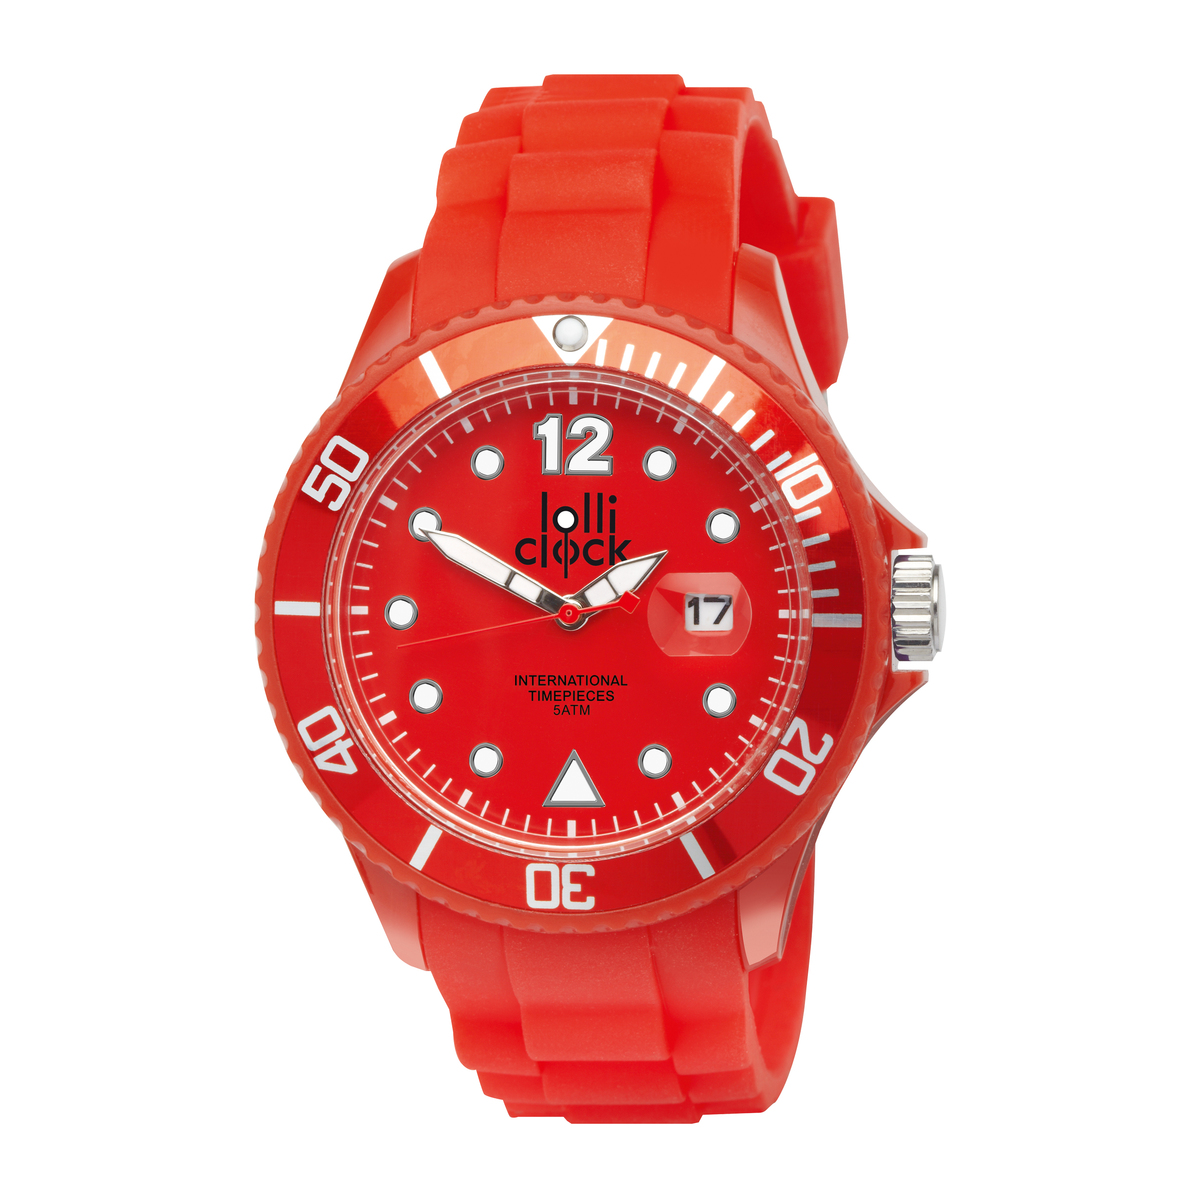 LM Armbanduhr LOLLICLOCK-DATE RED rot